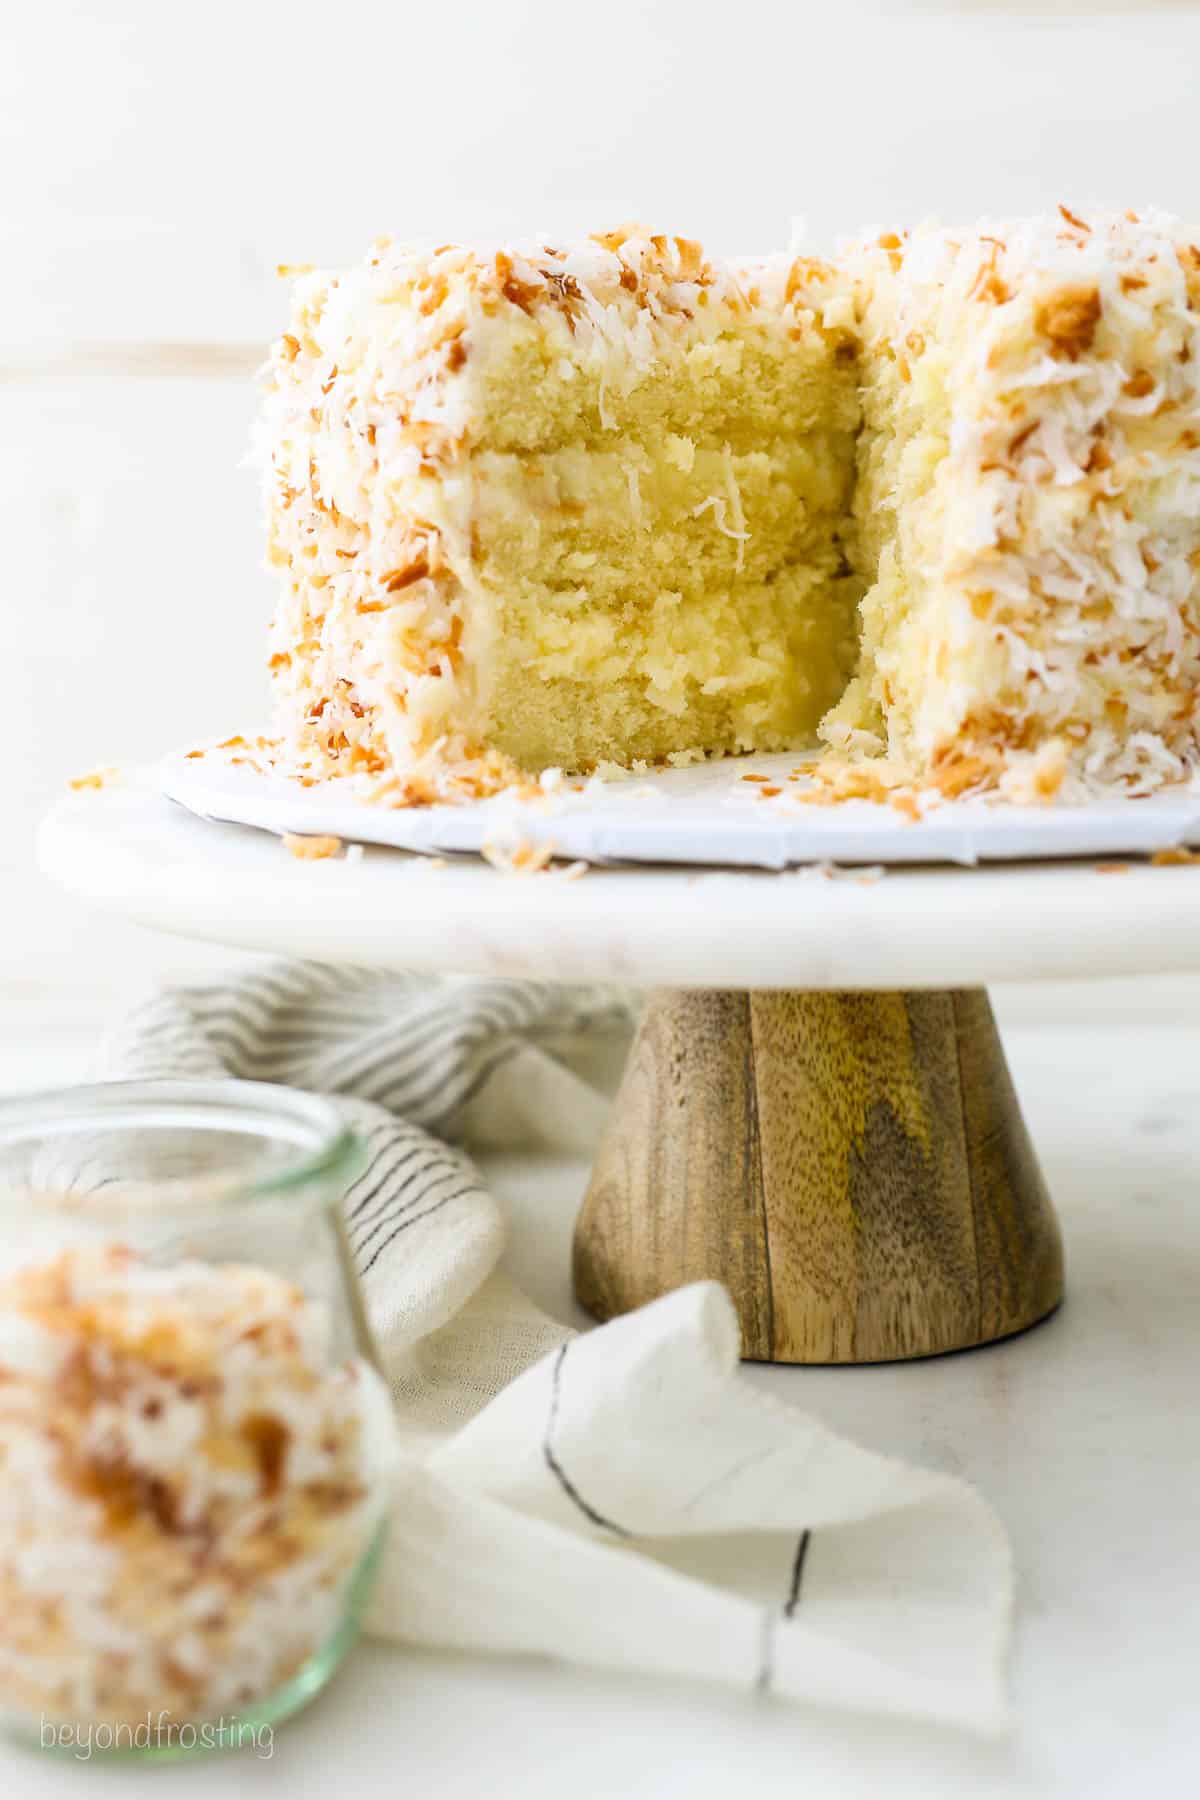 Coconut custard cake covered with toasted coconut with a slice missing, on a white cake stand with a wooden base, next to a jar of toasted coconut.